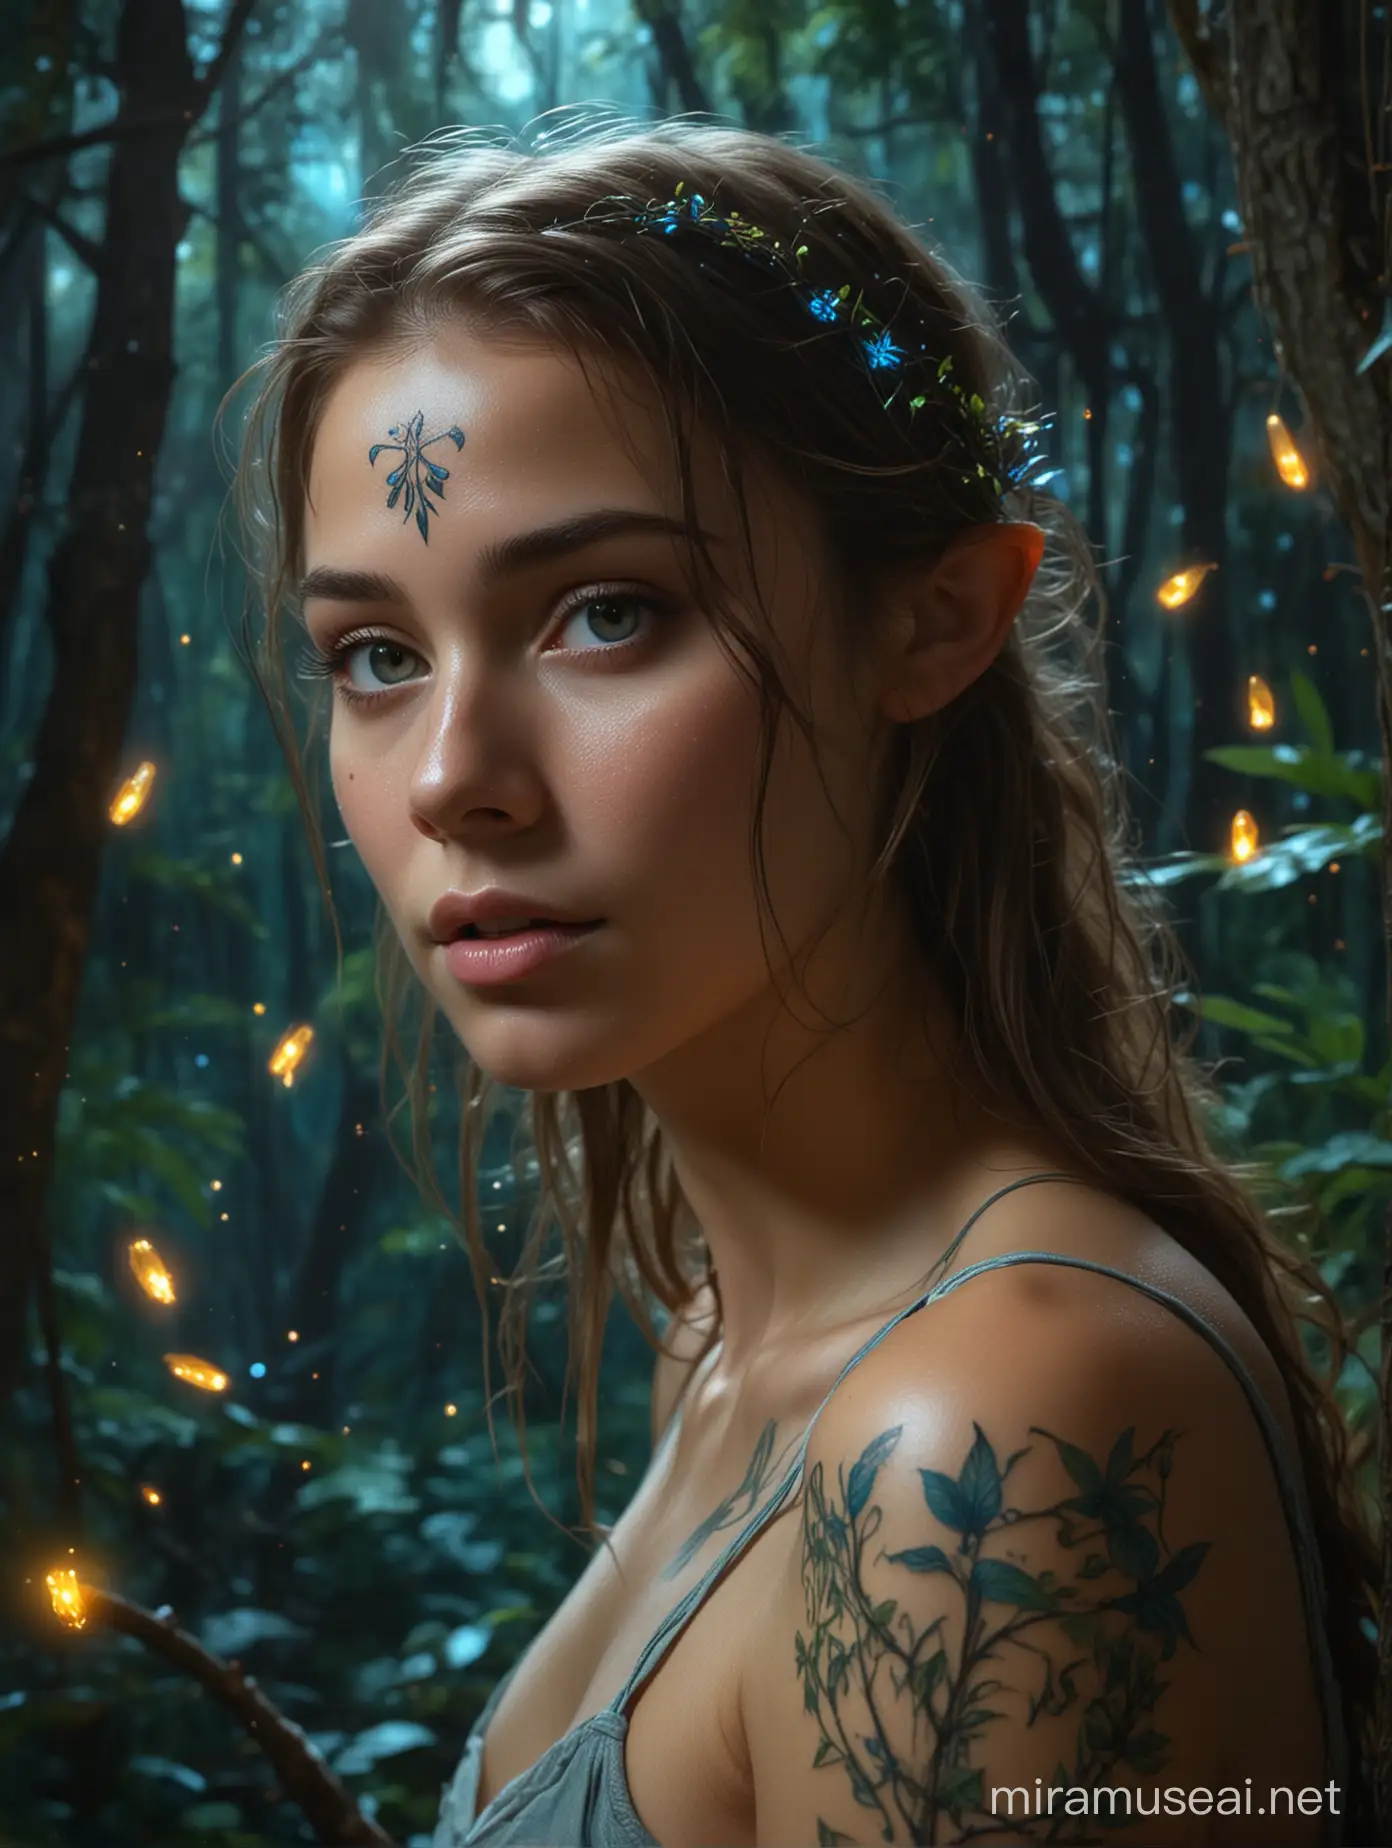 Enchanted Jungle Girl with Bioluminescent Tattoo in Candid Style